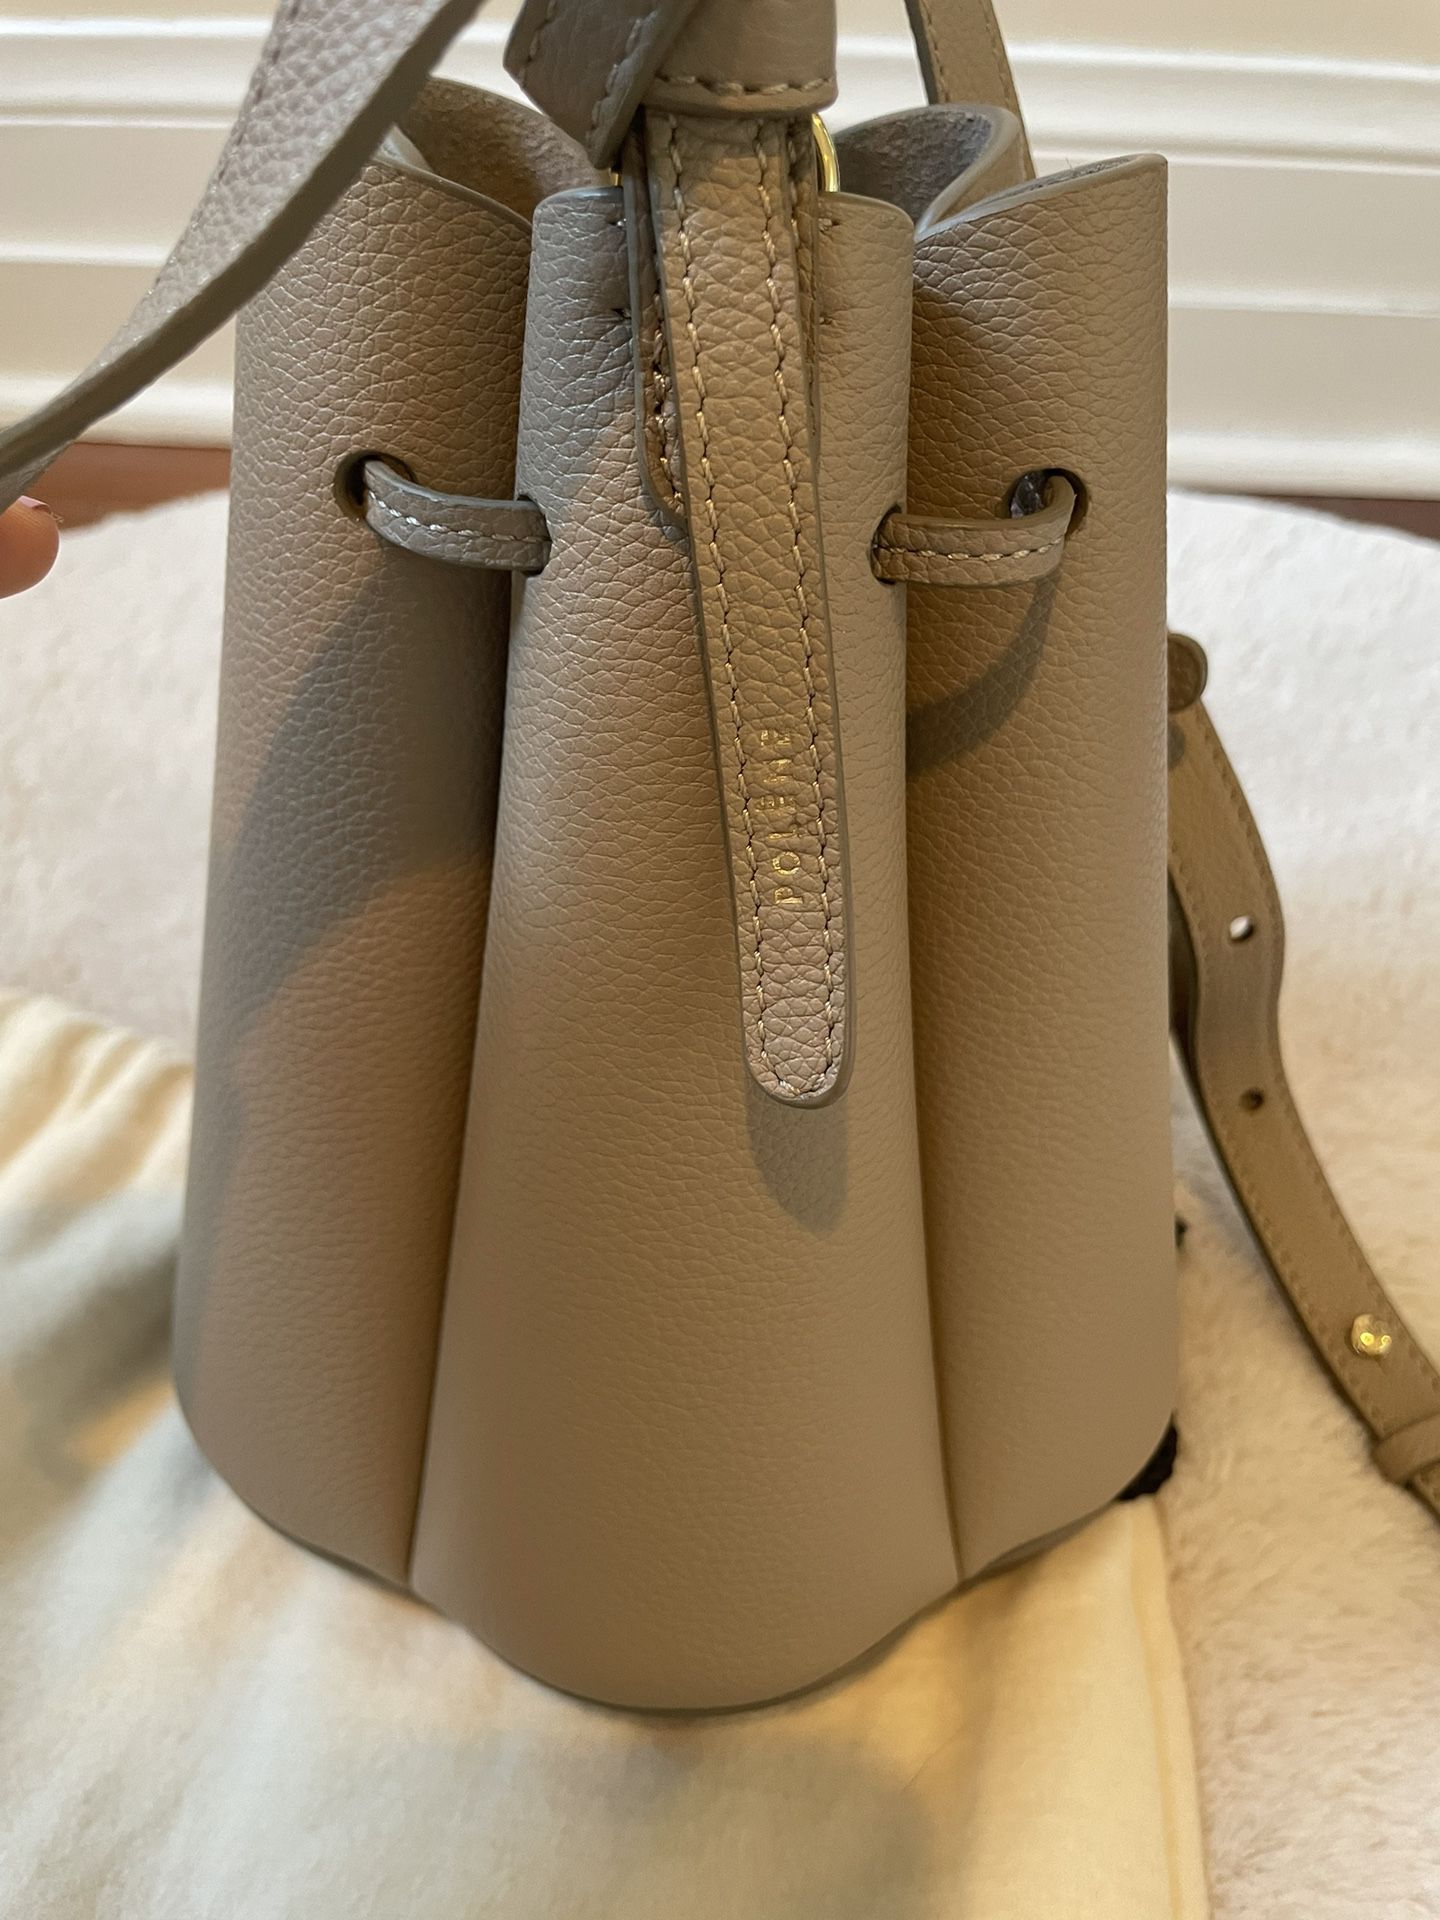 Meet my first ever Polène bag in the most gorgeous shade - Taupe